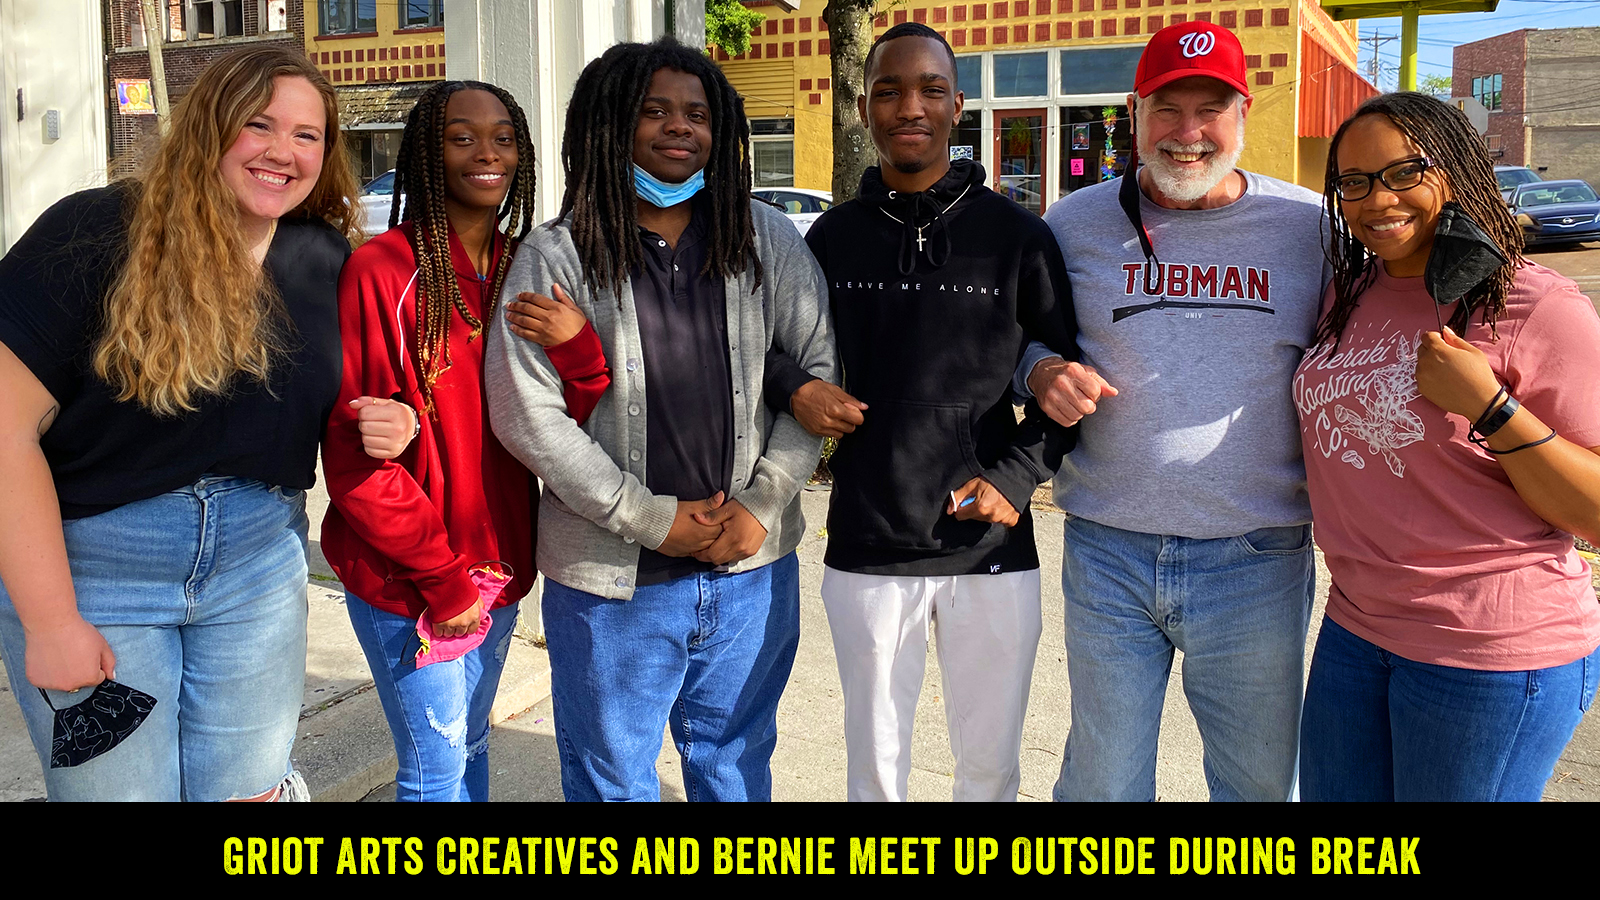 Griot Arts Creatives and Bernie Meet Up Outside during break